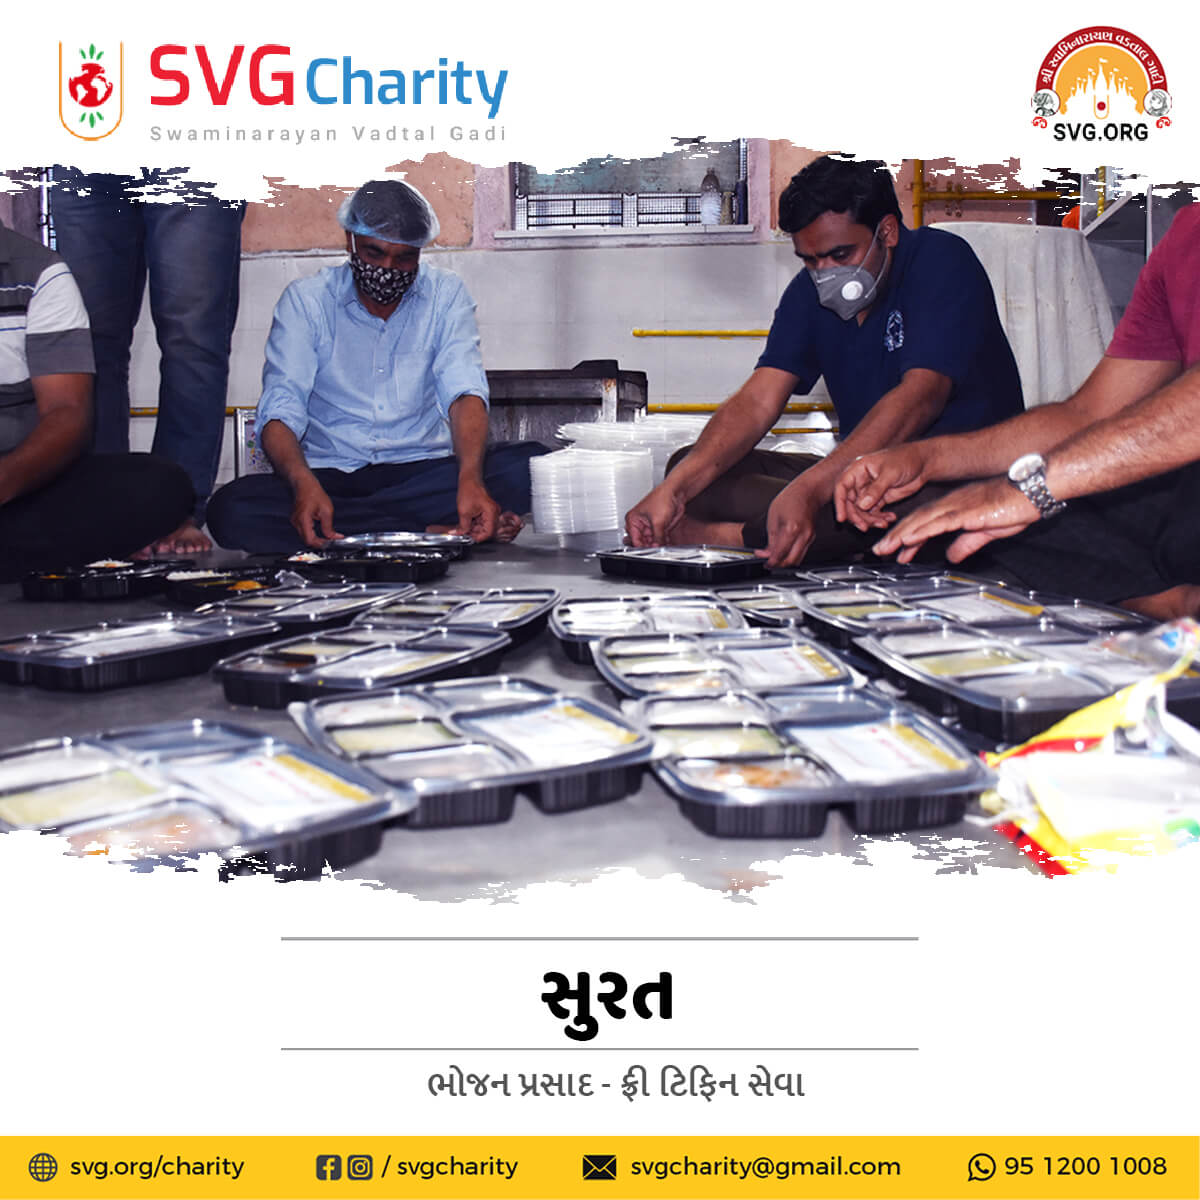 SVG Charity : Food Donation(Tiffin Seva) for Covid-19 Patient & Home Quarantined Families in Surat | April 2021